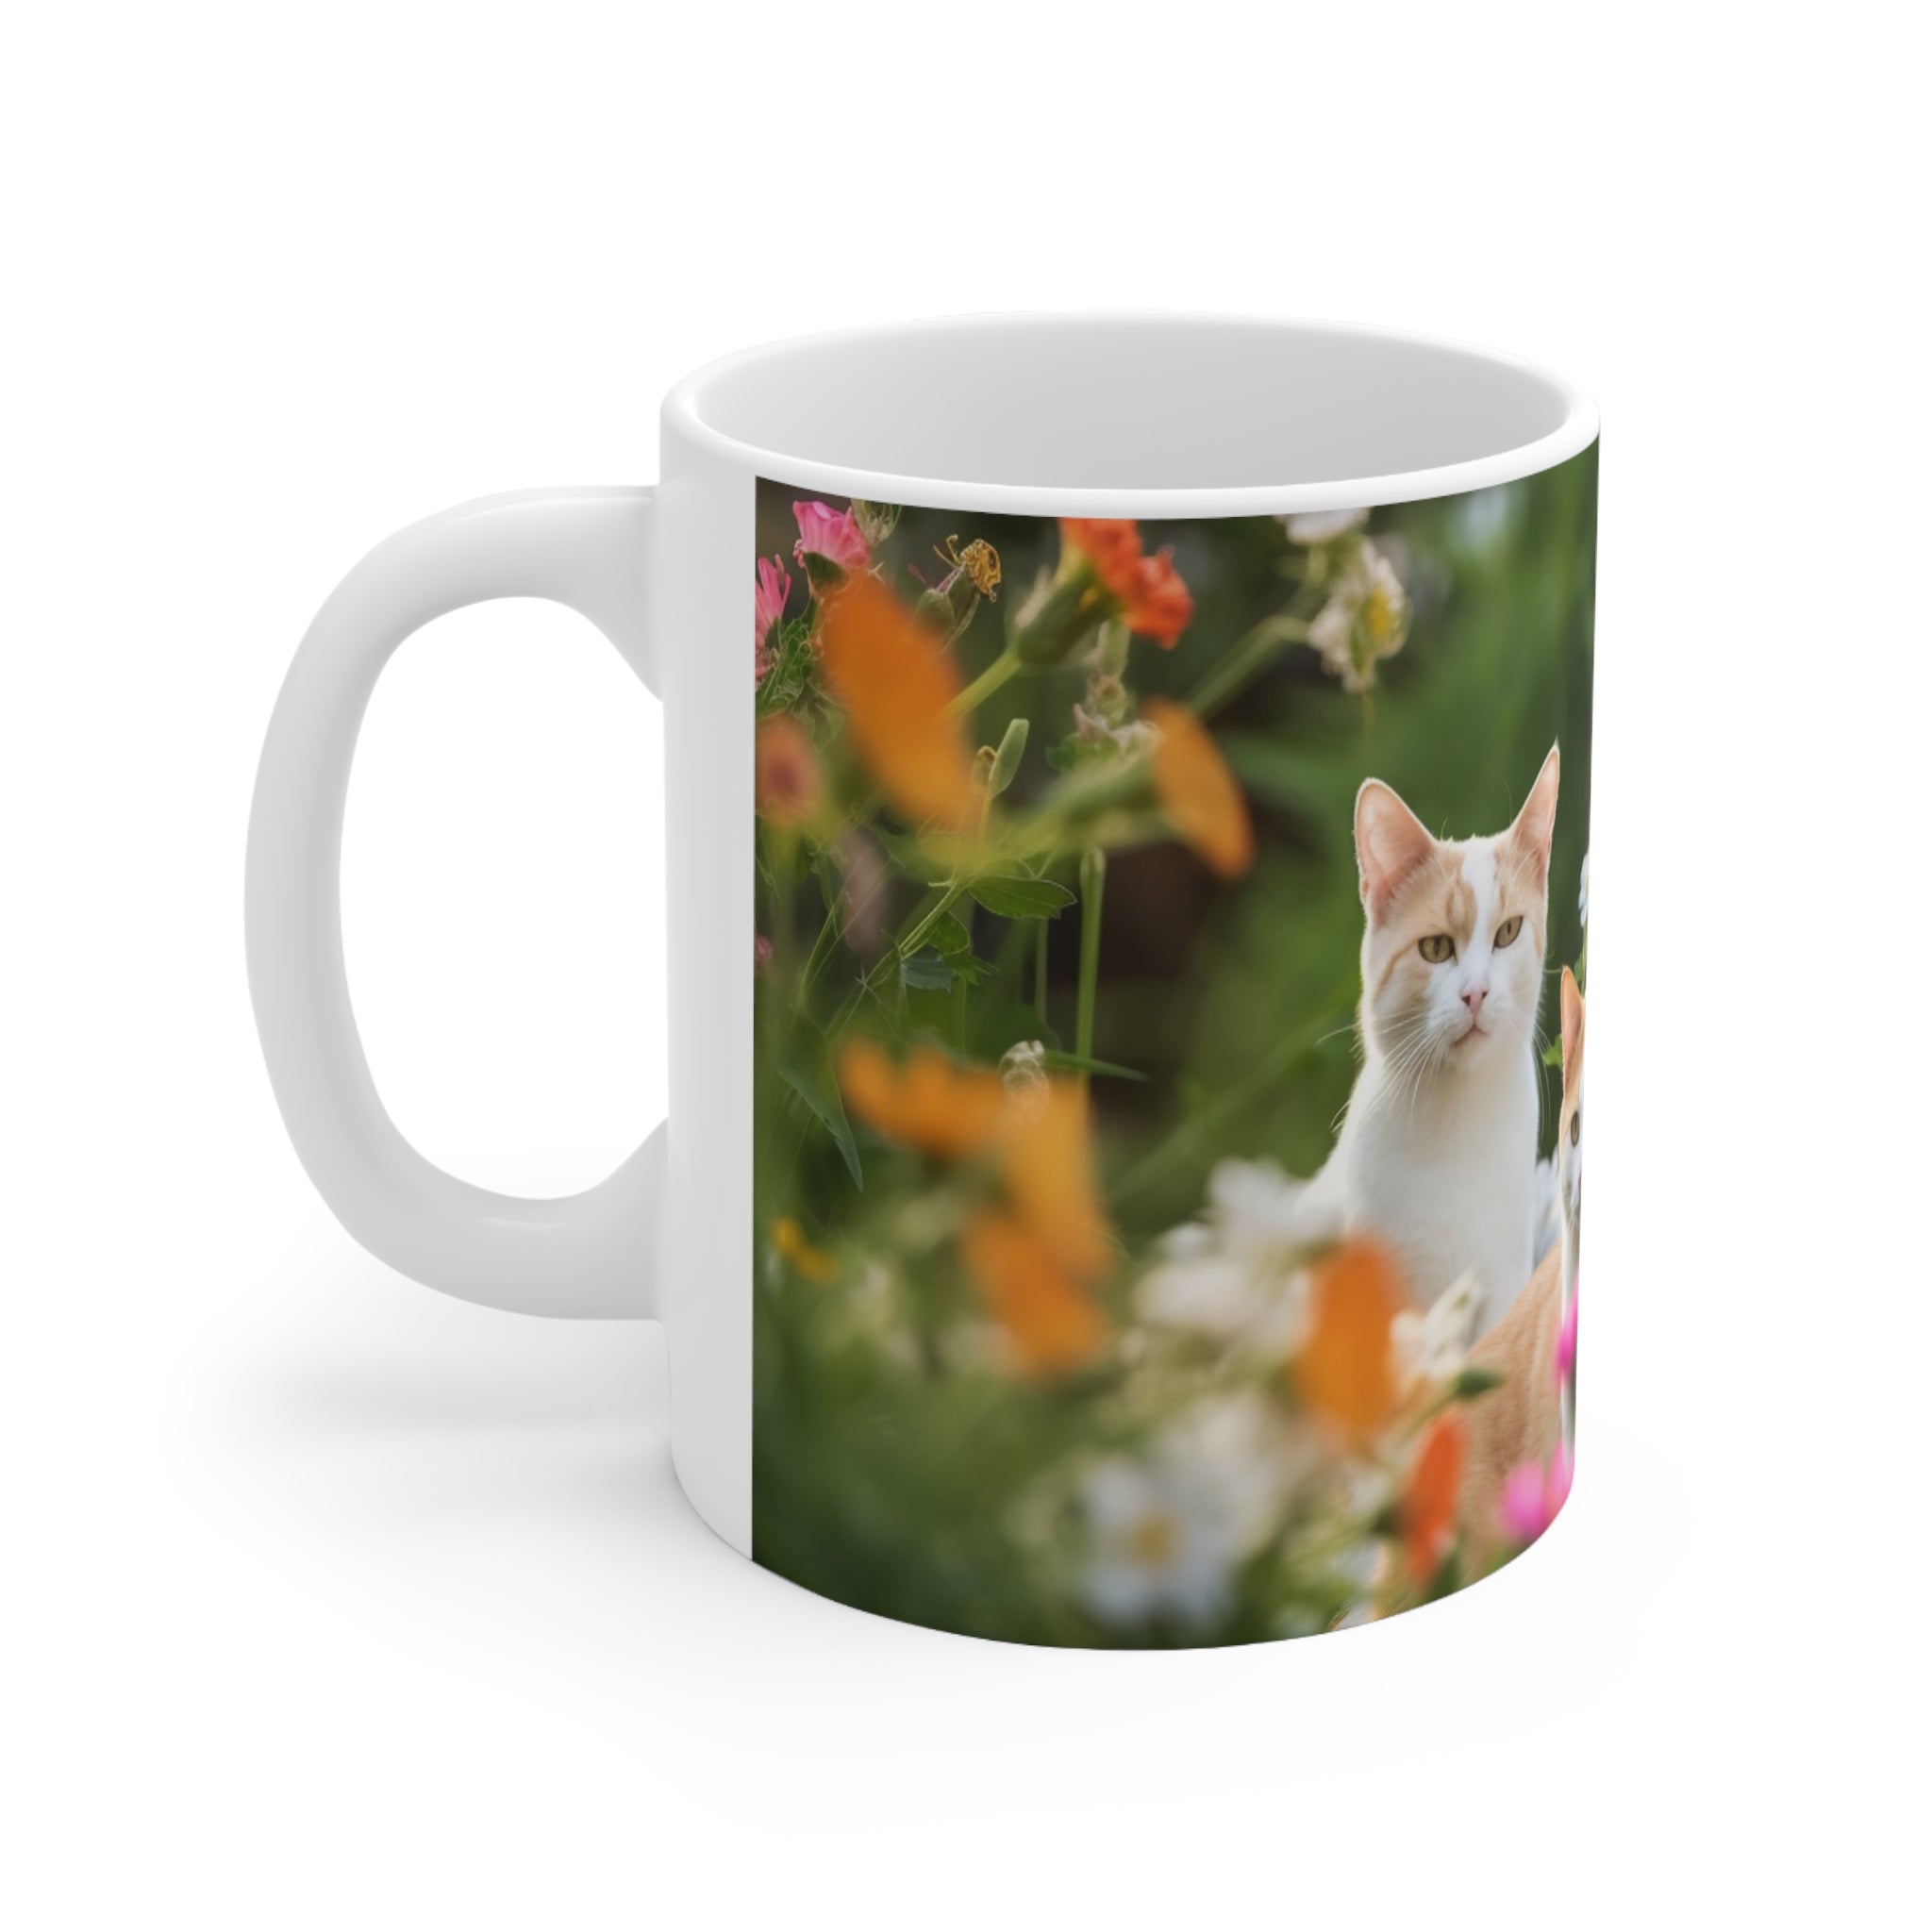 Cat Lovers & Garden Enthusiasts Gift Cat Feline Party Adorable Garden Ceramic Mug 11oz - Perfect Gift for Pet Lovers and Cat Owners